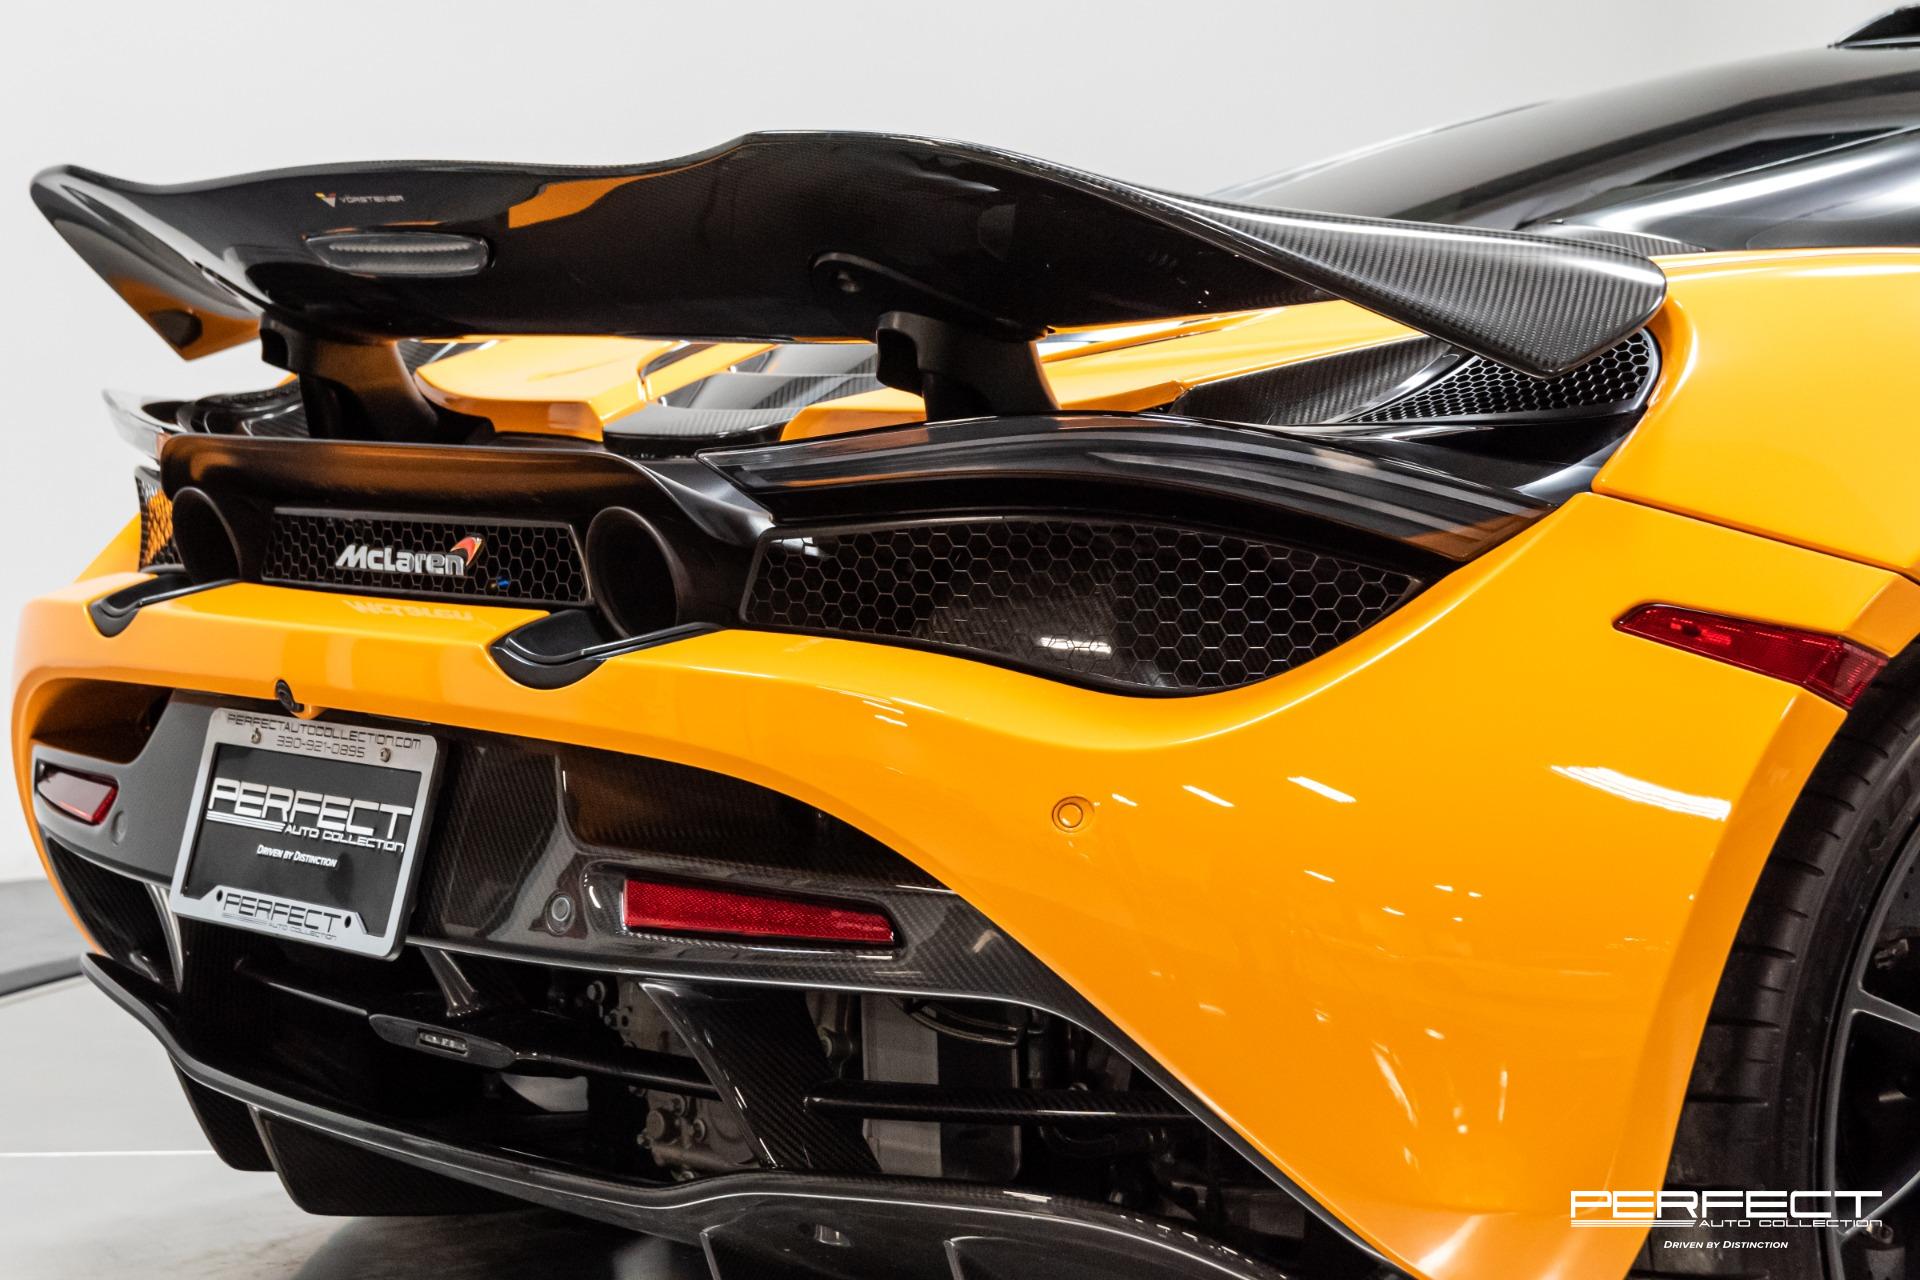 https://www.perfectautocollection.com/imagetag/1835/63/l/Used-2018-McLaren-720S-Base-1653652059.jpg